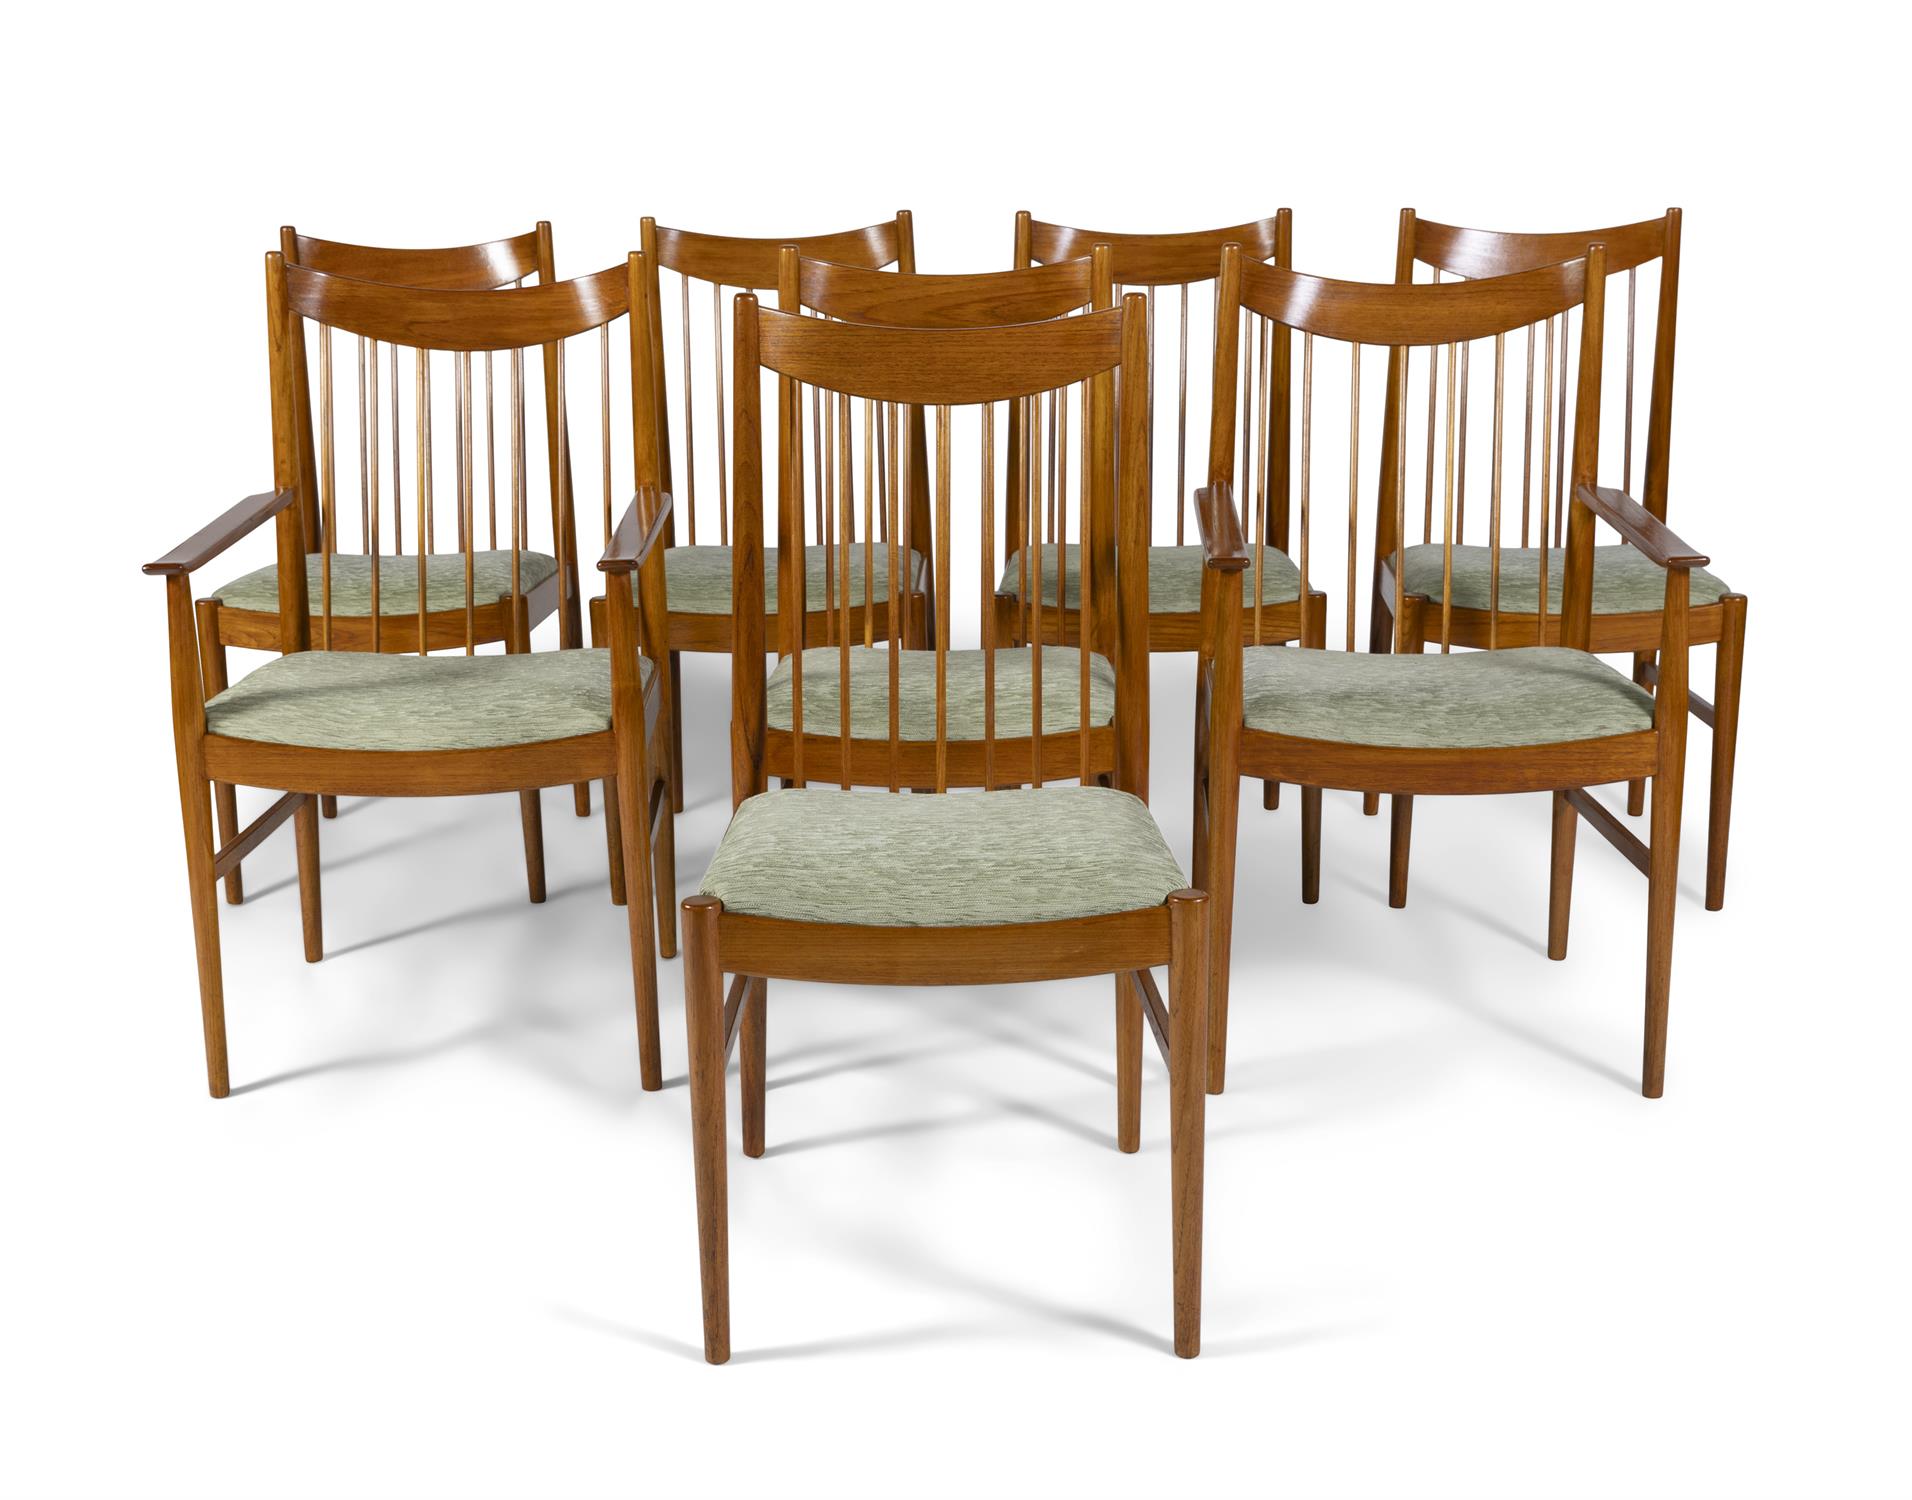 ARNE VODDER A set of eight teak dining chairs with two carvers by Arne Vodder for Sibast, - Image 2 of 7